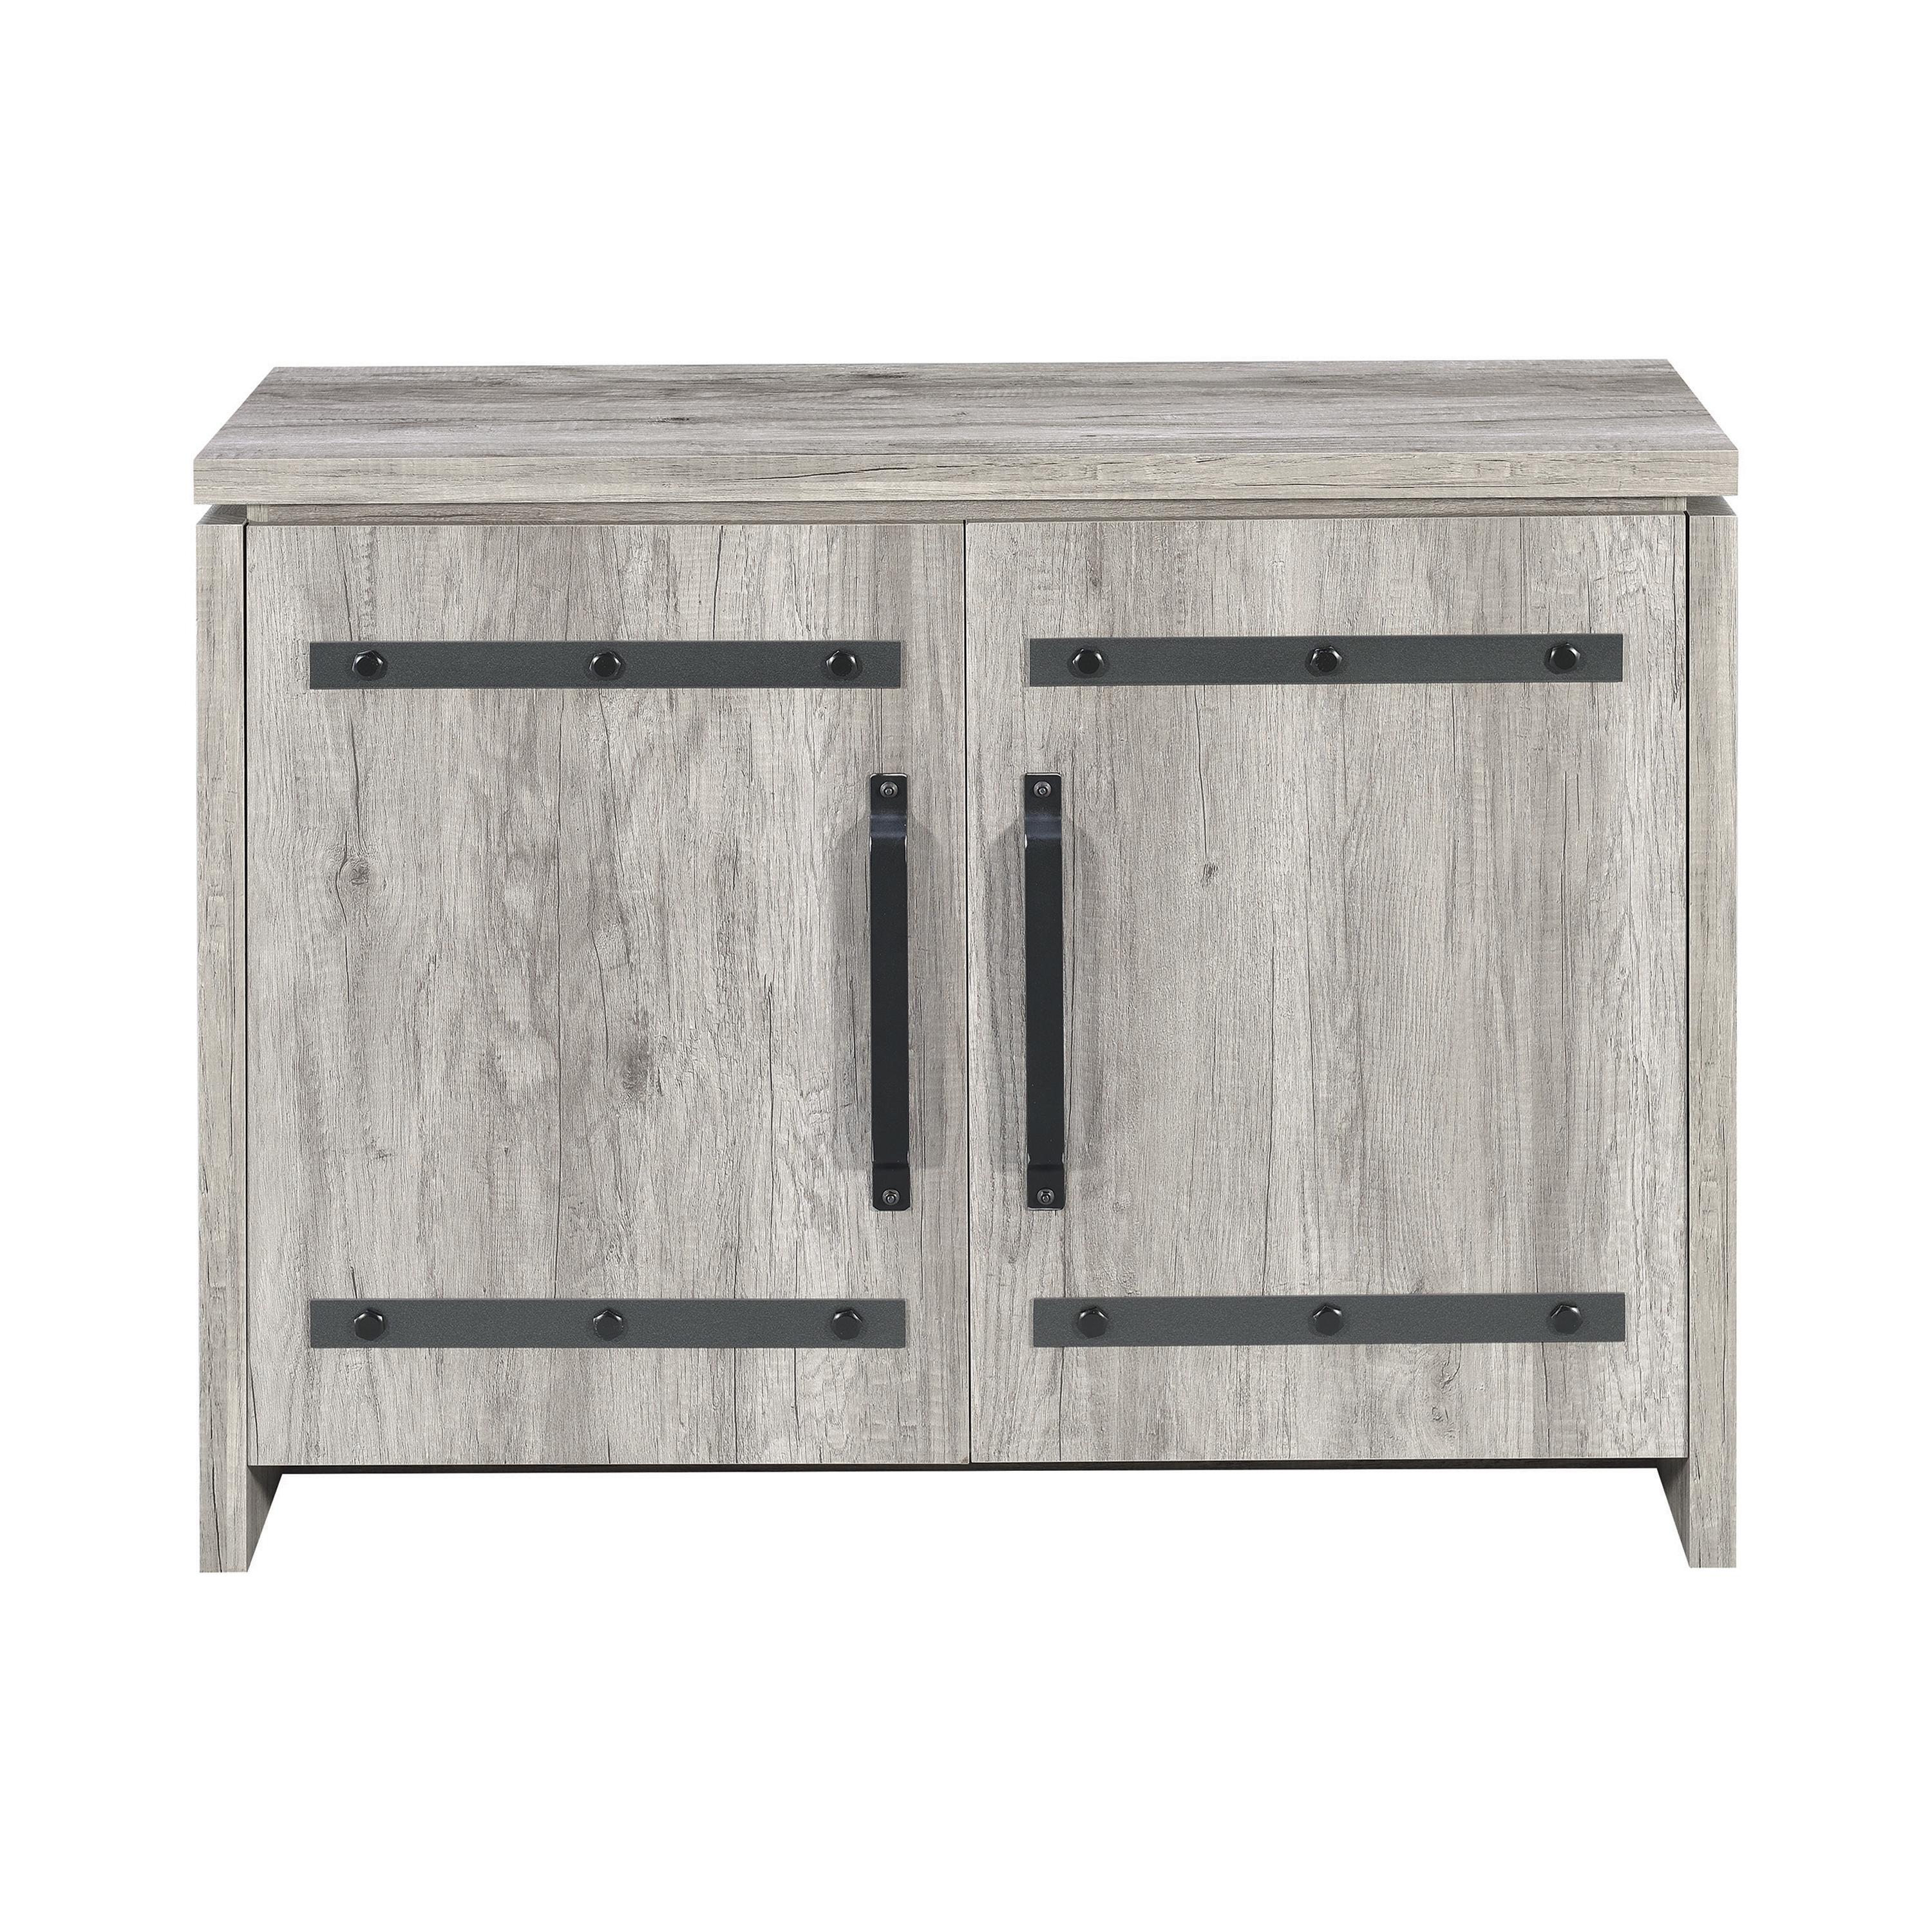 Modern Accent Cabinet 950785 950785 in Driftwood 